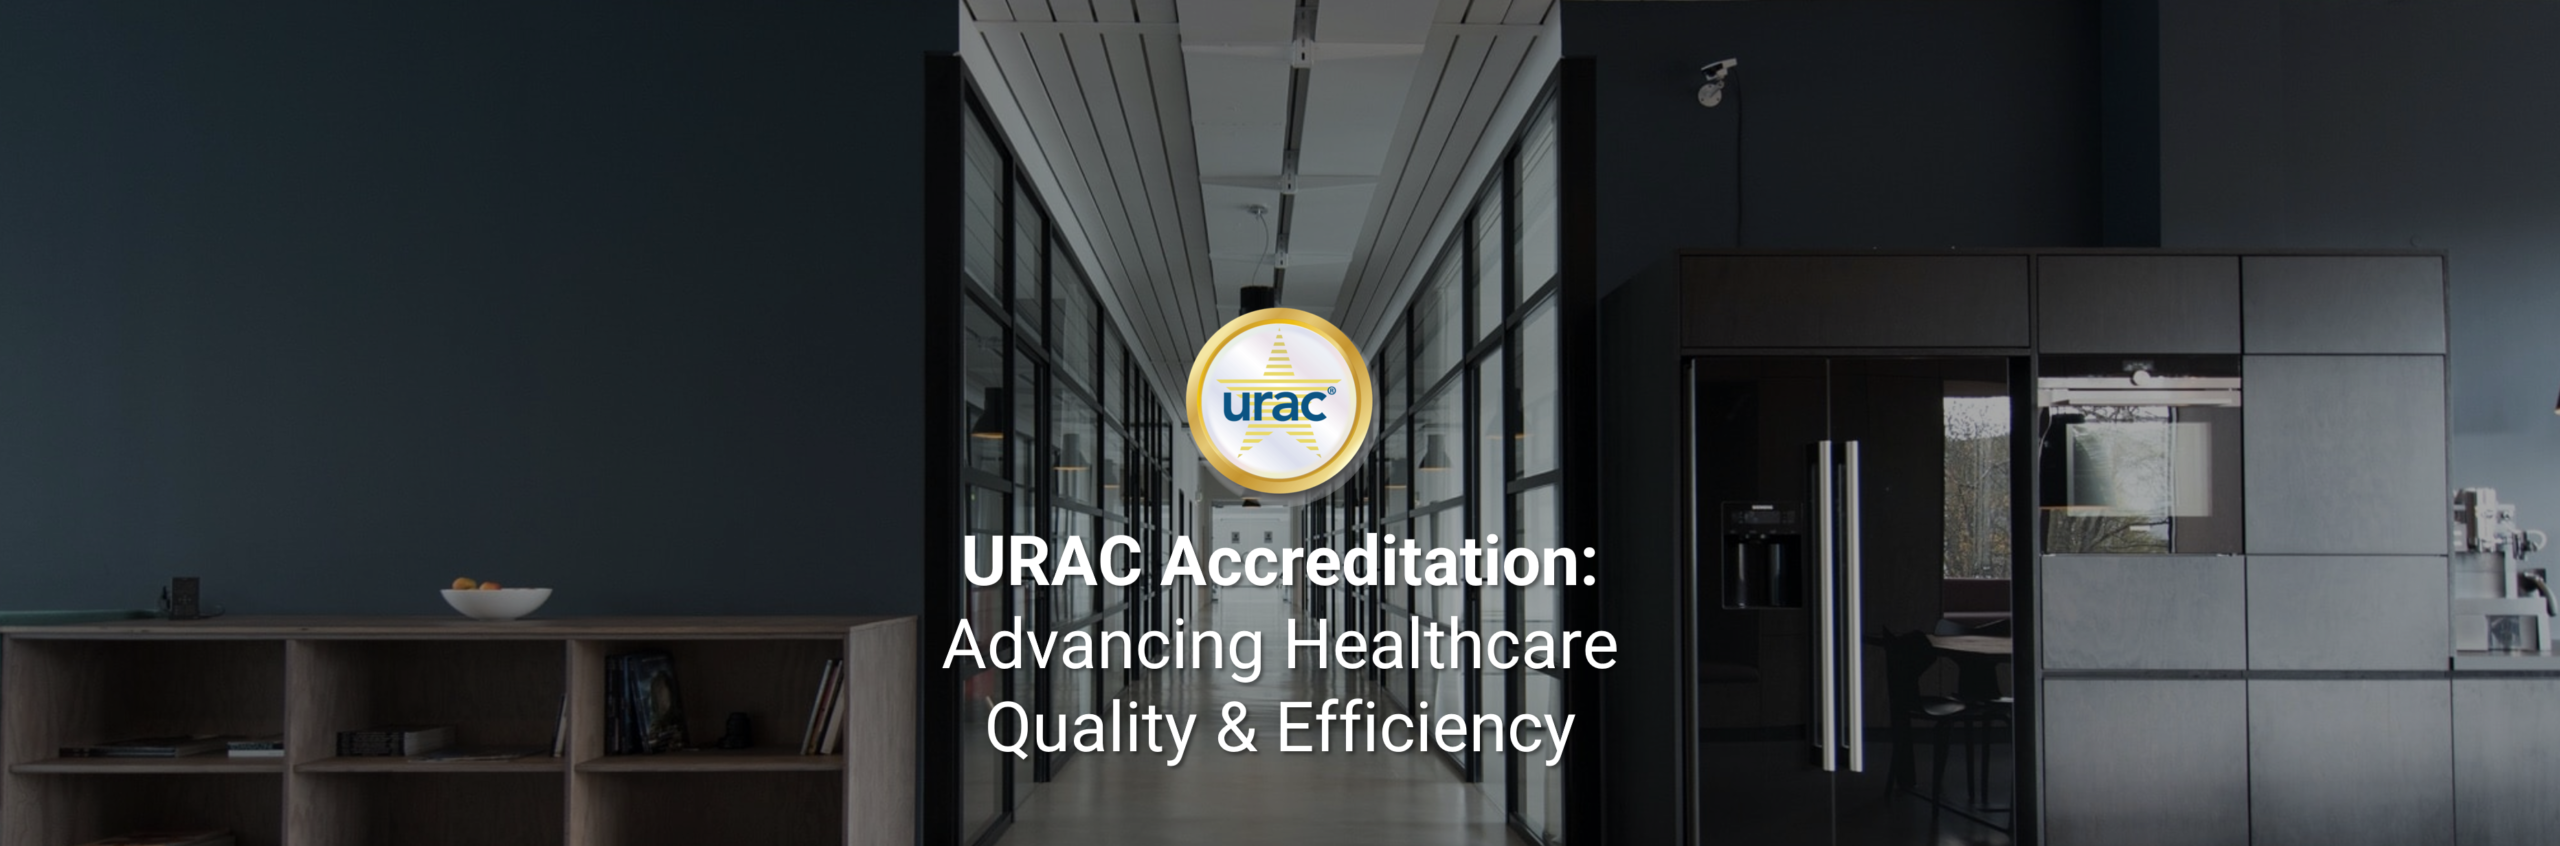 URAC Accreditation Advancing Healthcare Quality and Efficiency